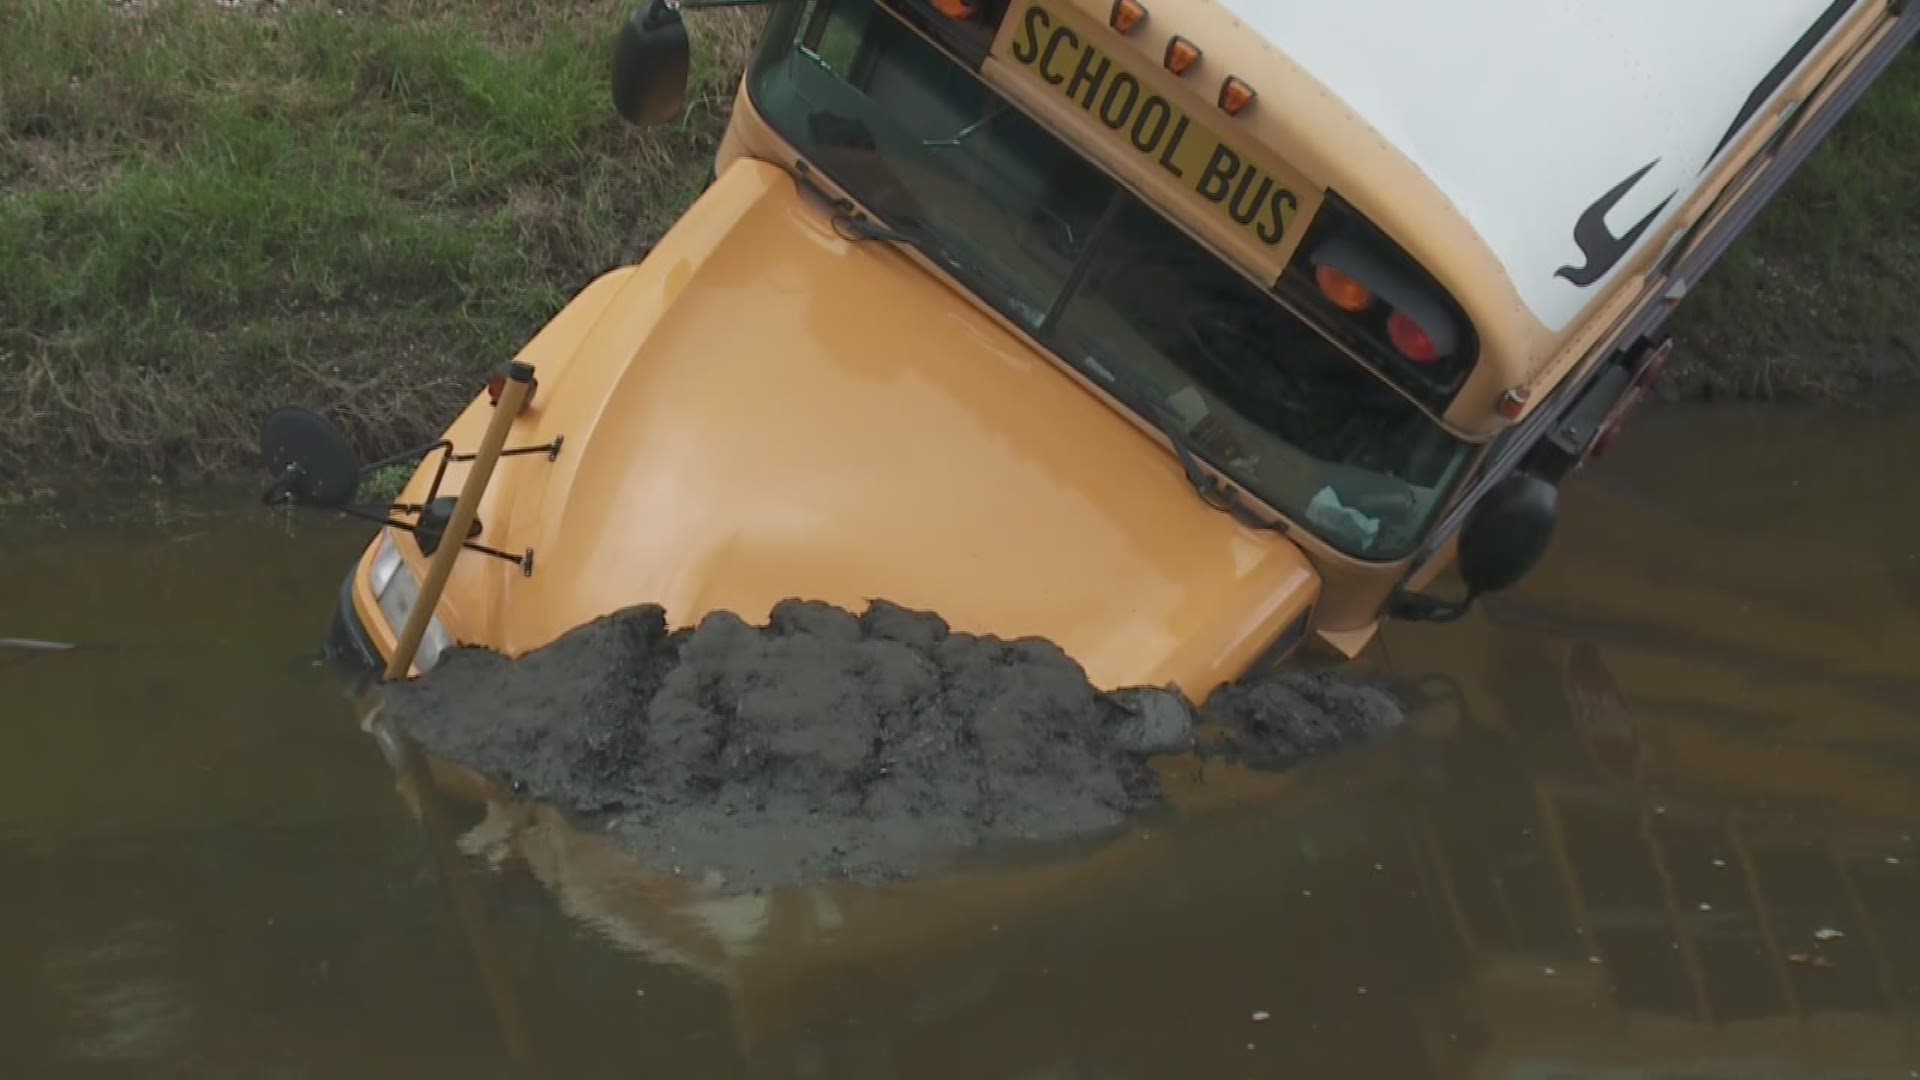 Wynton Yates talks about an accident involving a school bus that went into a Metairie canal.